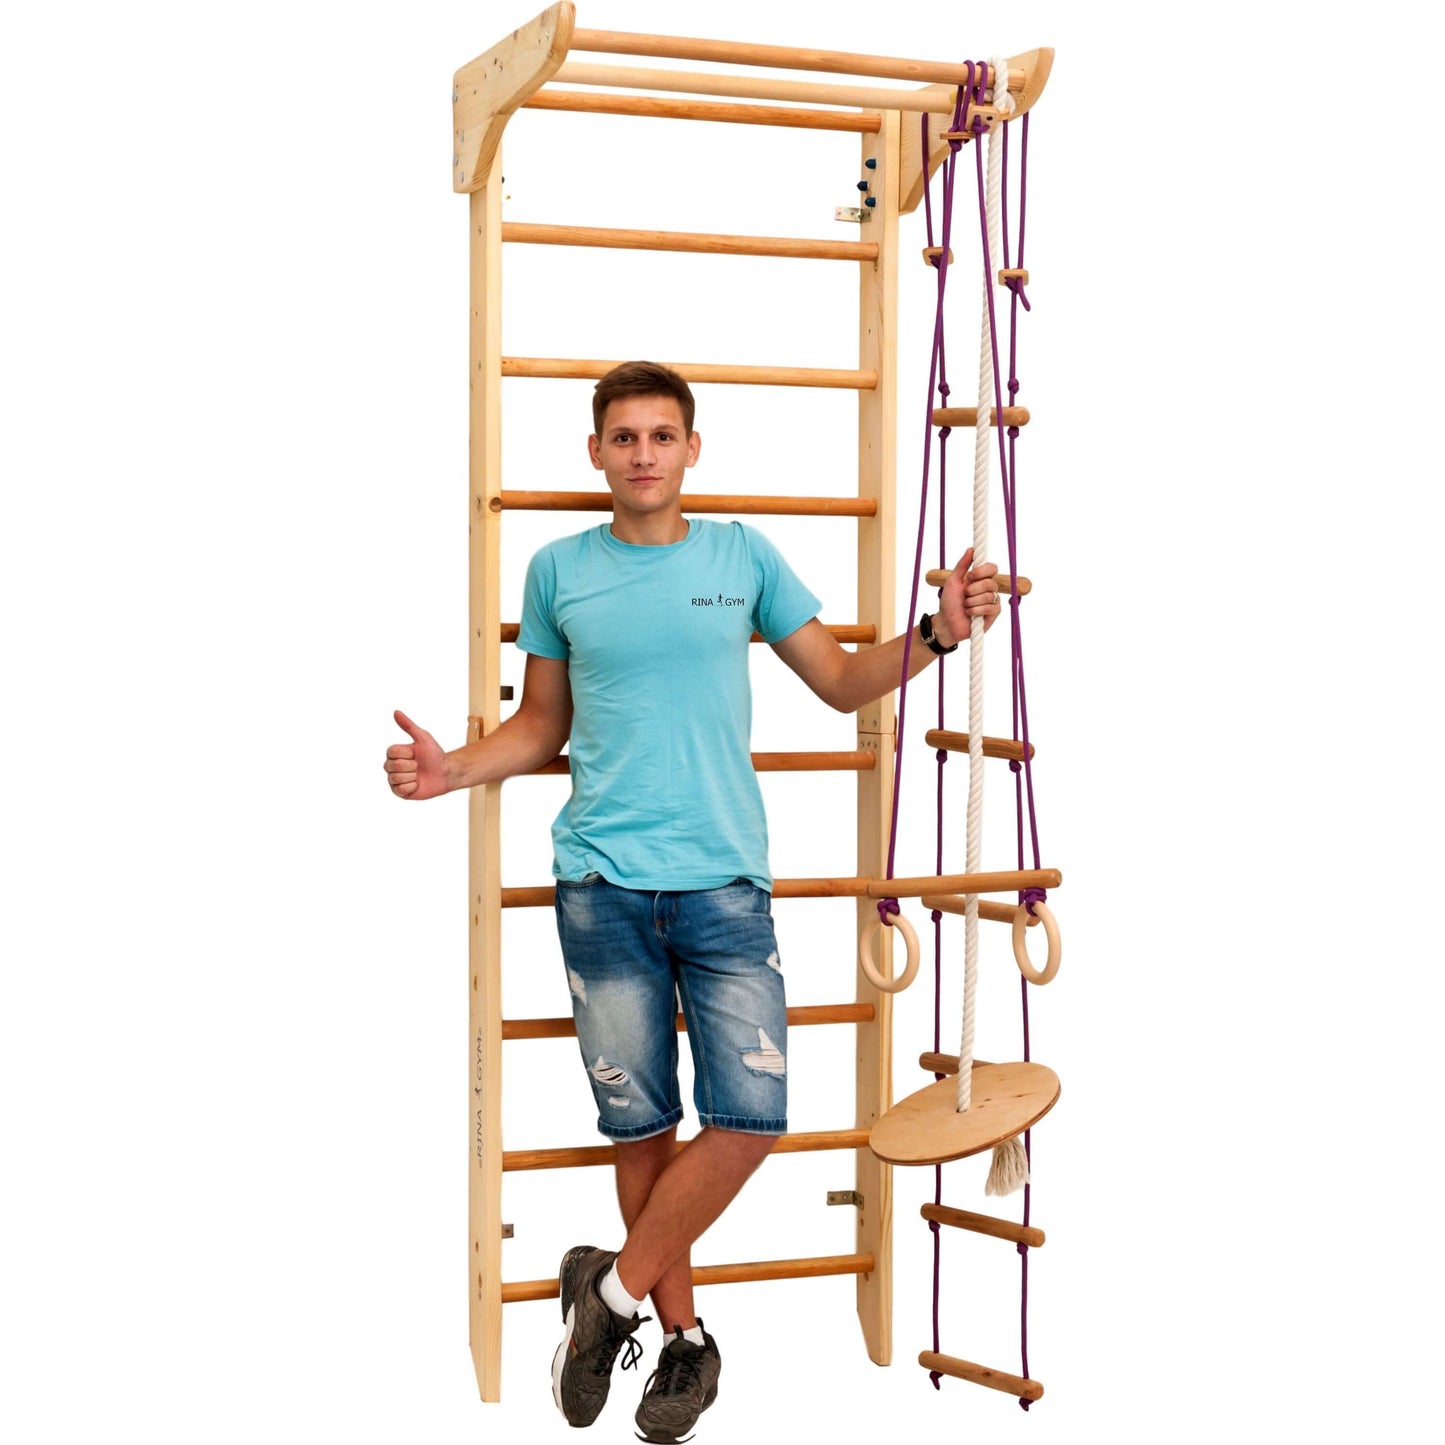 Climbing wall INA for children, various colors